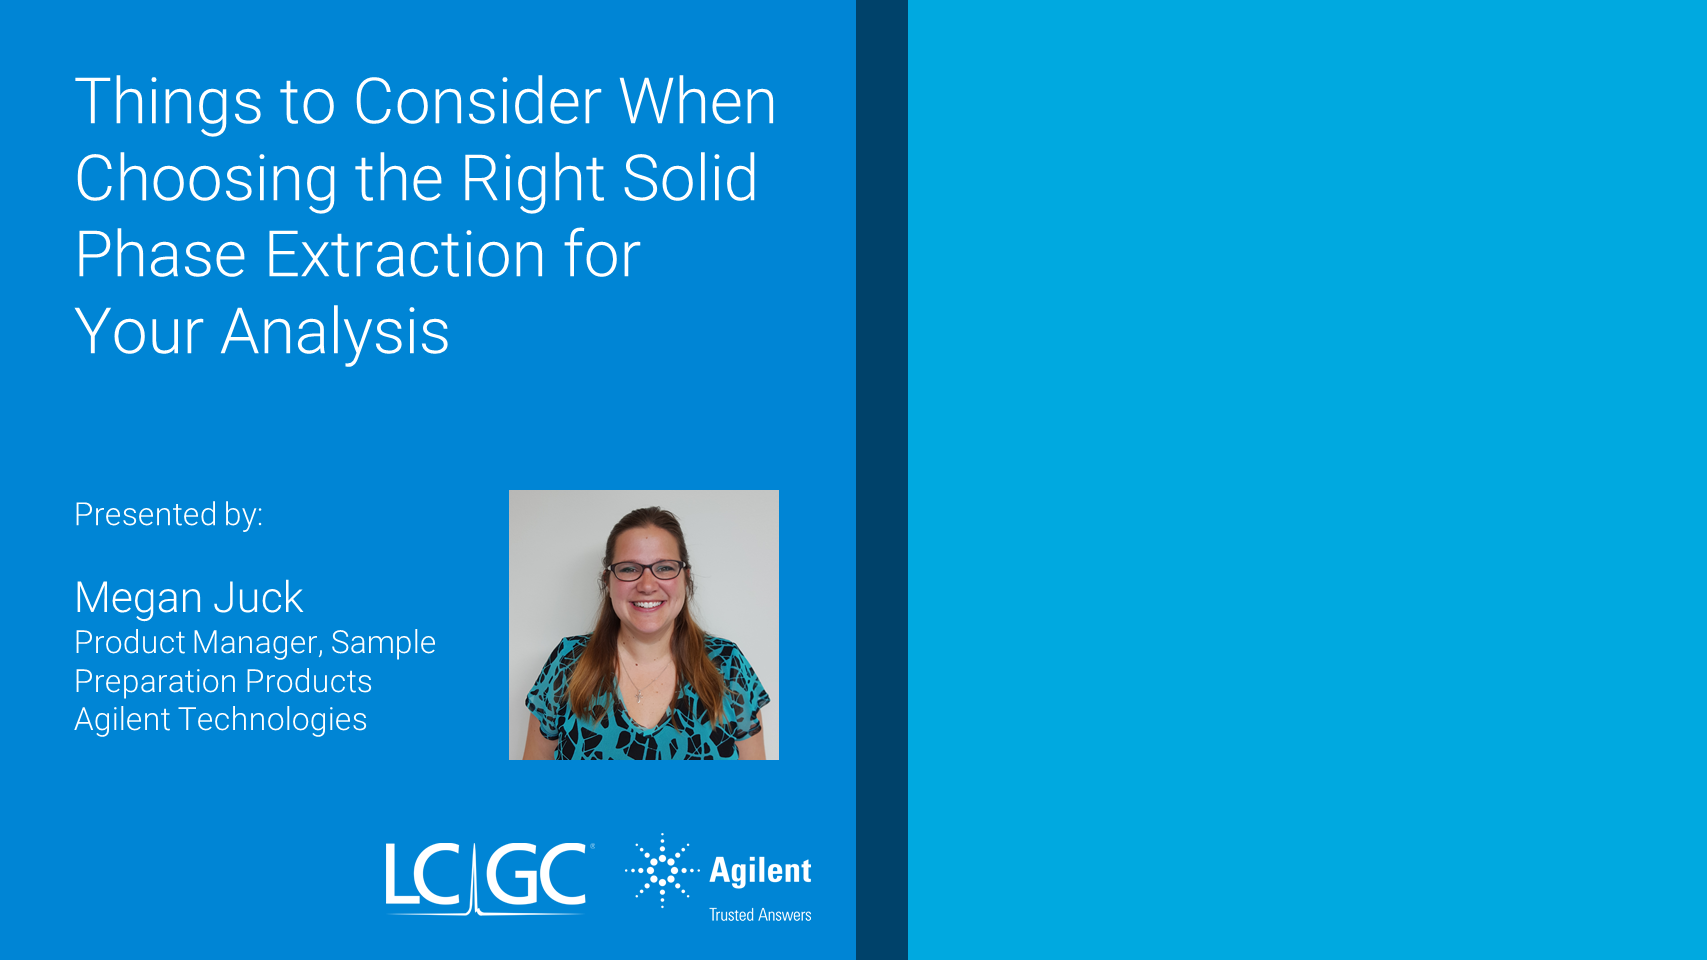 Choosing the Right Solid Phase Extraction for Your Analysis